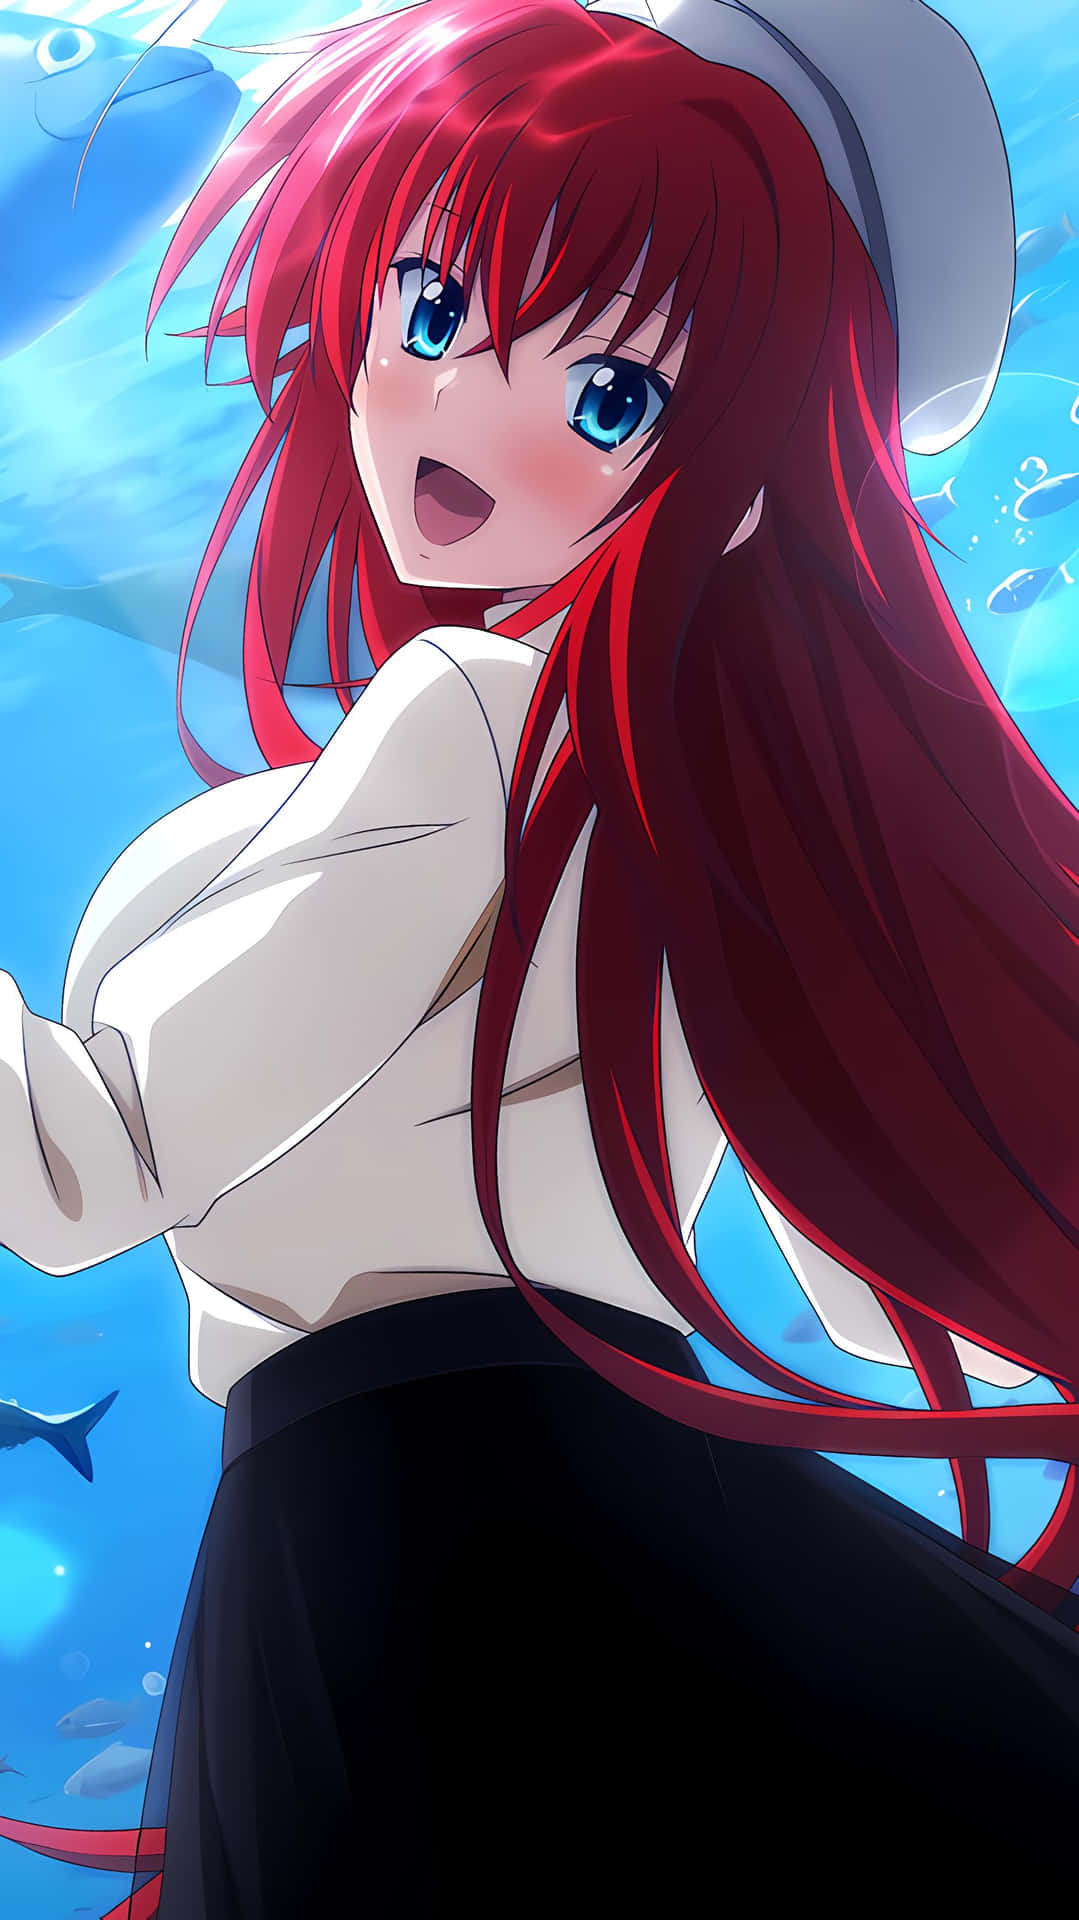 Wallpaper  anime girls picture in picture Gremory Rias Highschool DxD  1920x1080  smreko  1393455  HD Wallpapers  WallHere